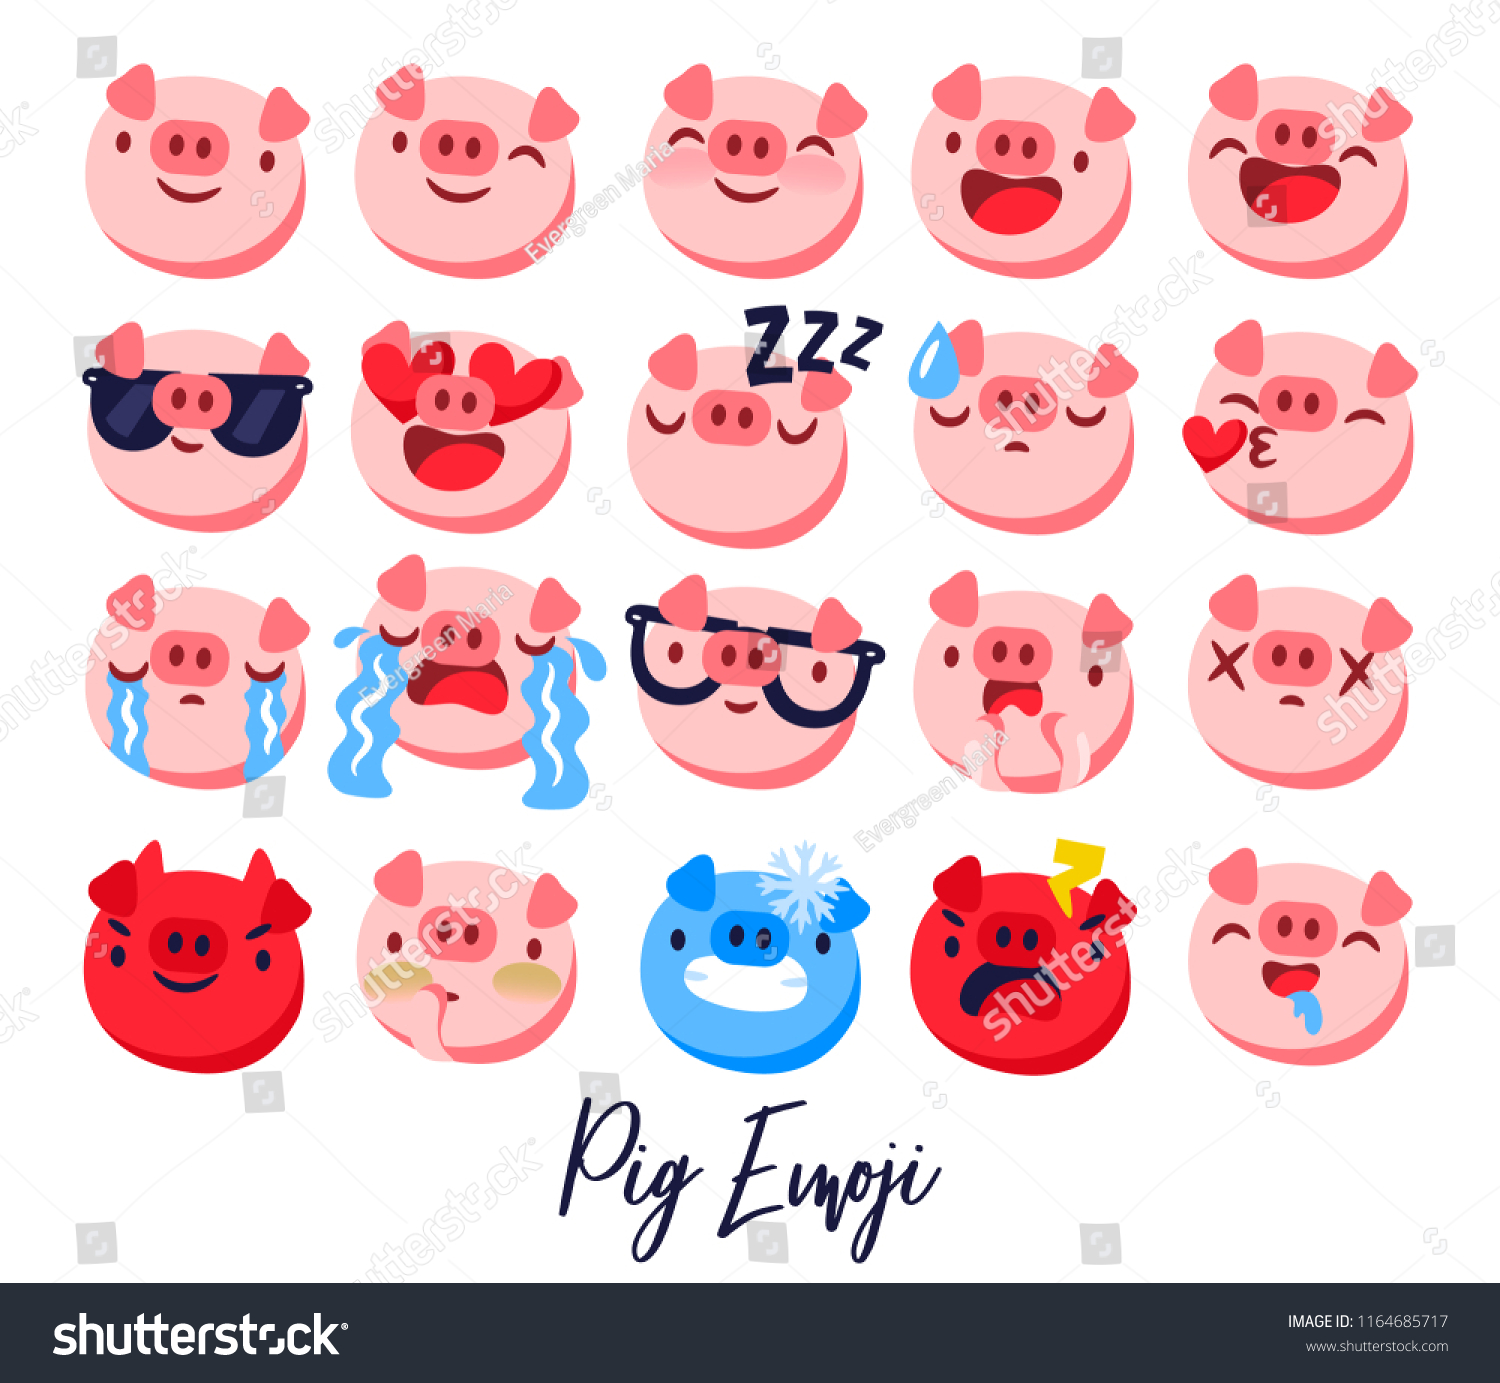 SVG of Happy chinese new year 2019 Zodiac sign calendar with pig emoji, emoticons pink colorful funny characters piglet. Vector illustration. svg